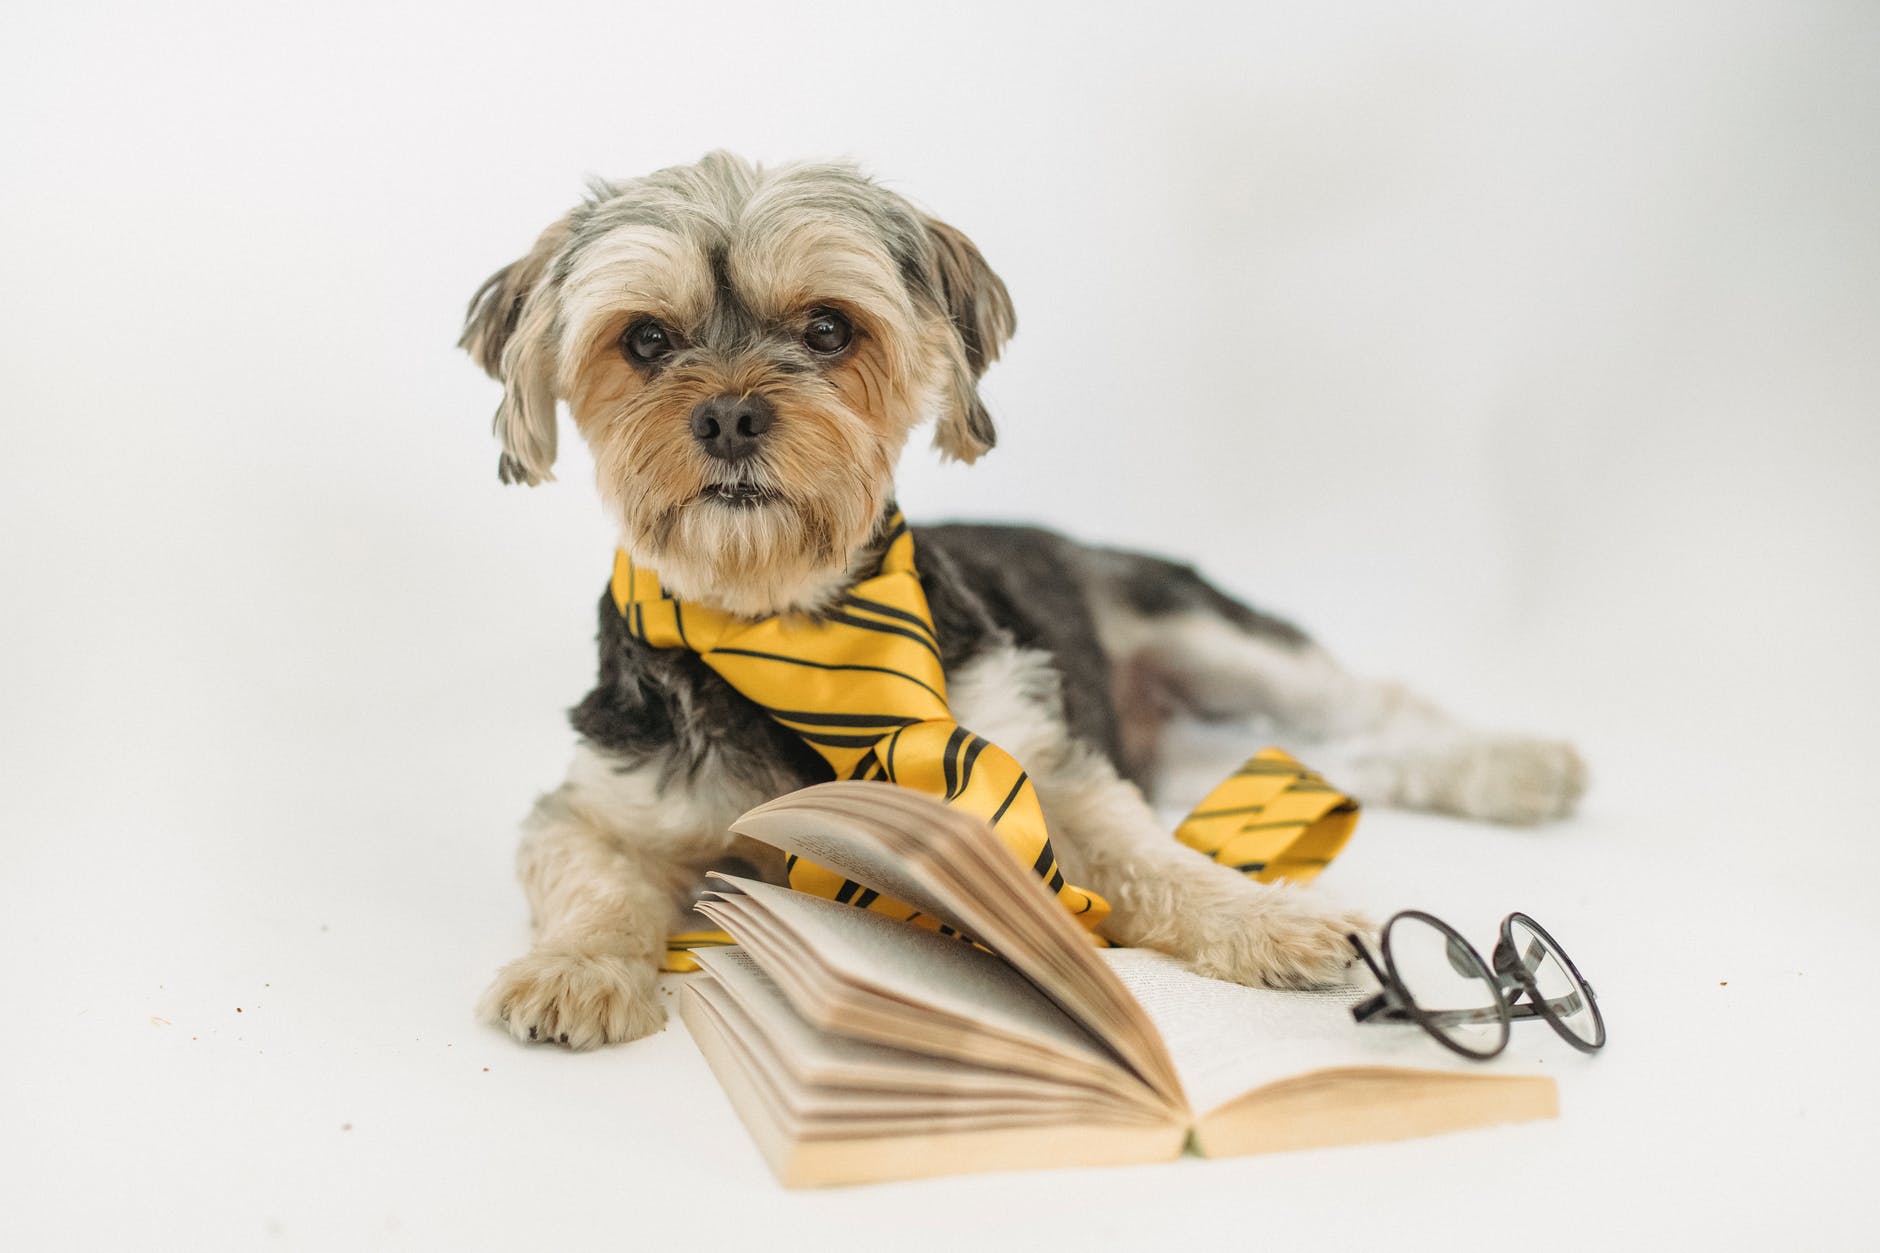 a dog wearing a yellow tie and glasses next to a book